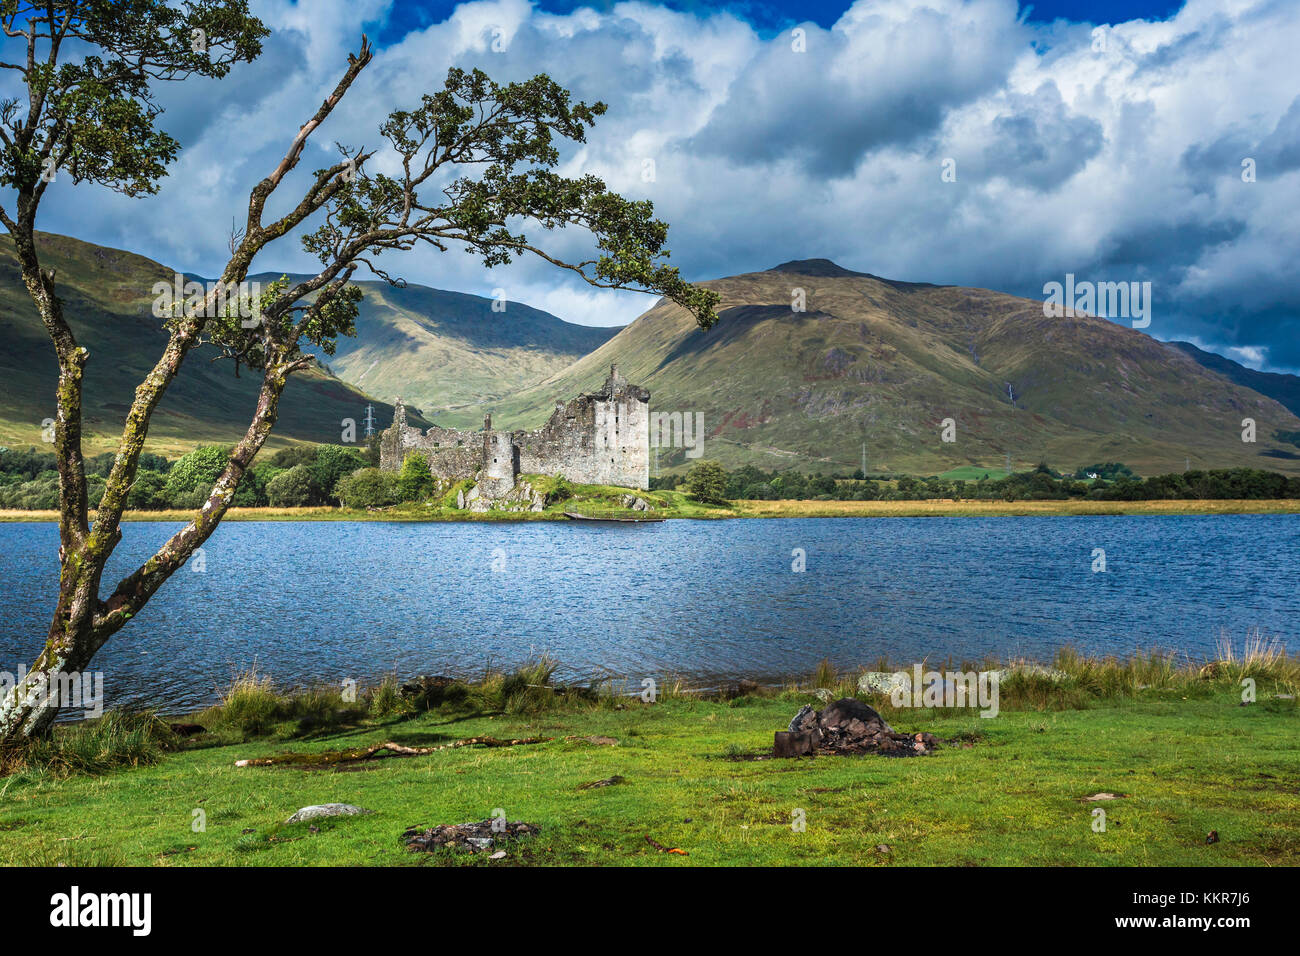 The ruin of Kilchurn Castle and mountains on Loch Awe, Scotland. Stock Photo